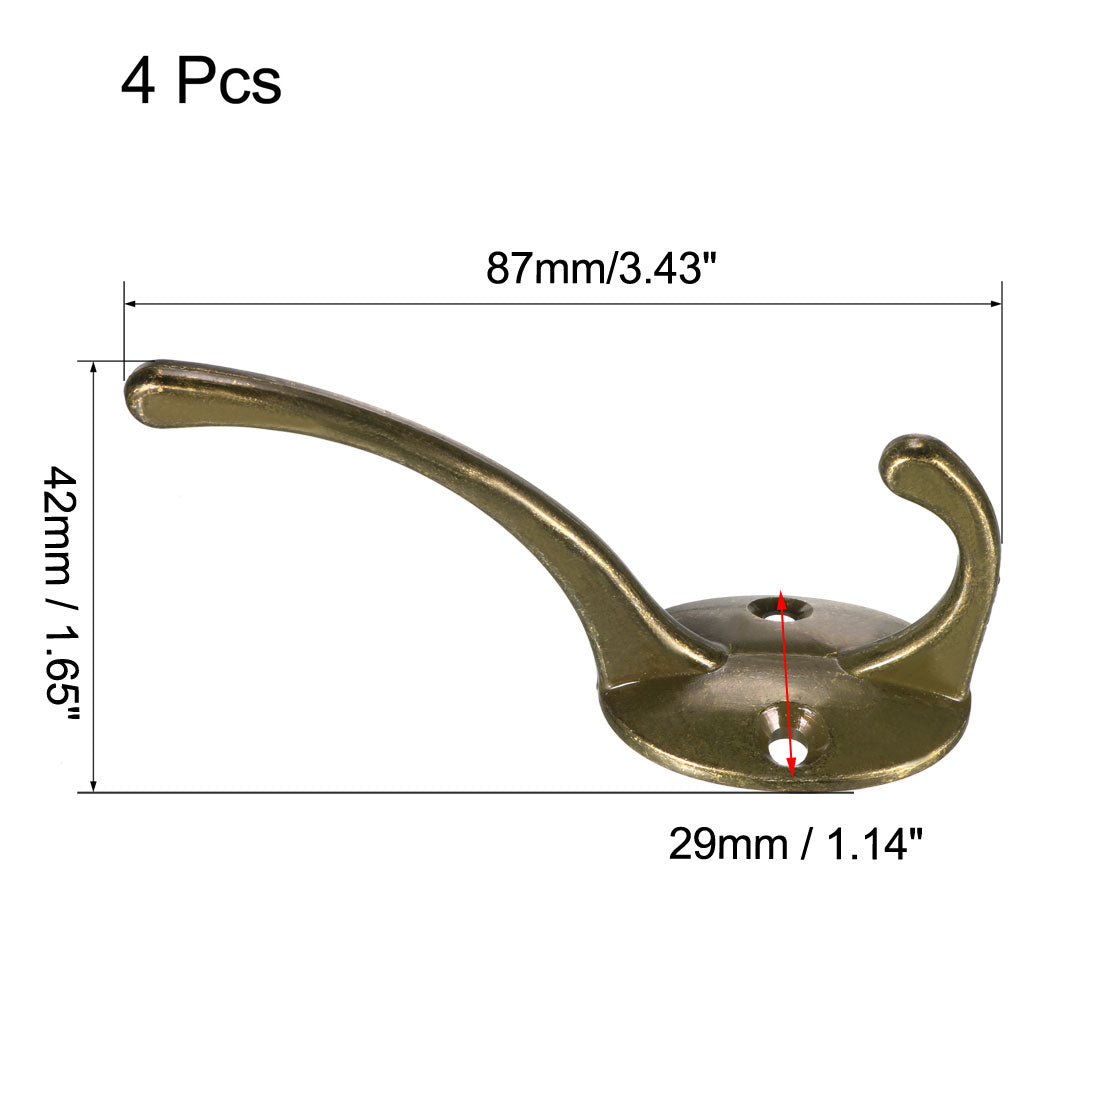 uxcell Uxcell Dual Prong Coat Hooks Wall Mounted Retro Double Hooks Utility Antique Bronze Hook for Coat Scarf Bag Towel Key Cap Cup Hat 87mm x 29mm x 42mm 4pcs